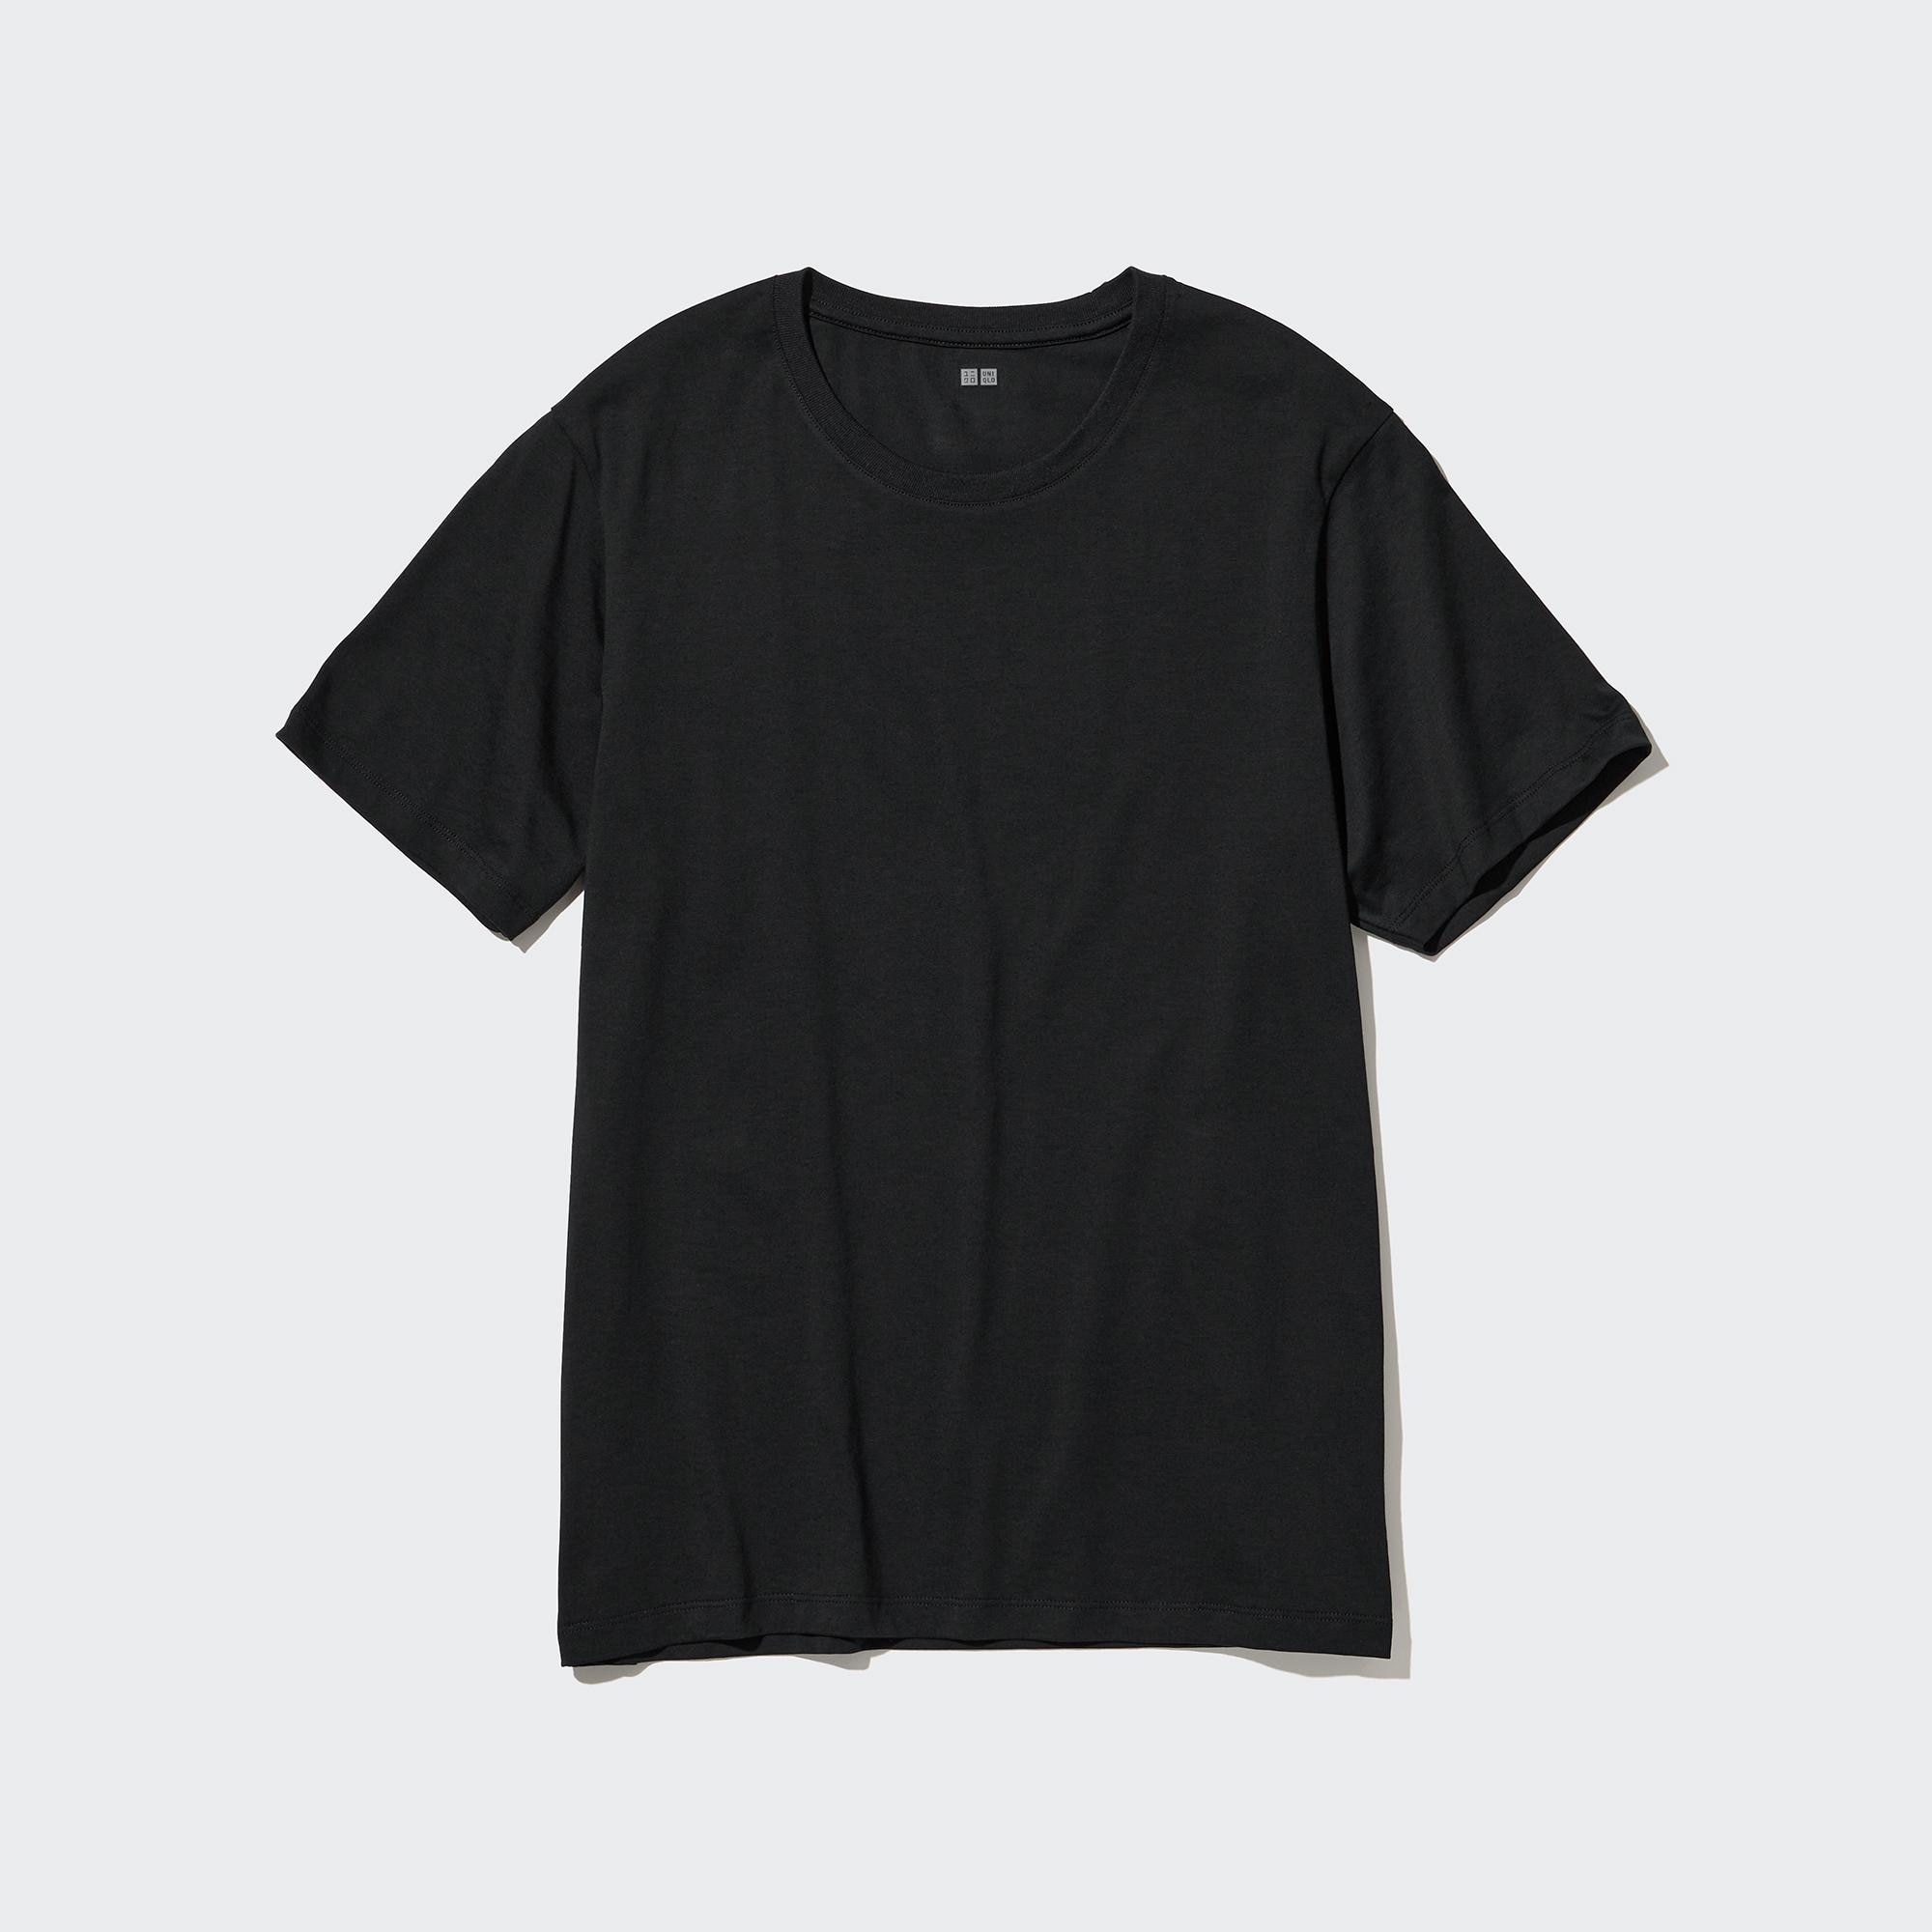 Best TShirt for Women Is the Uniqlo Crew Neck